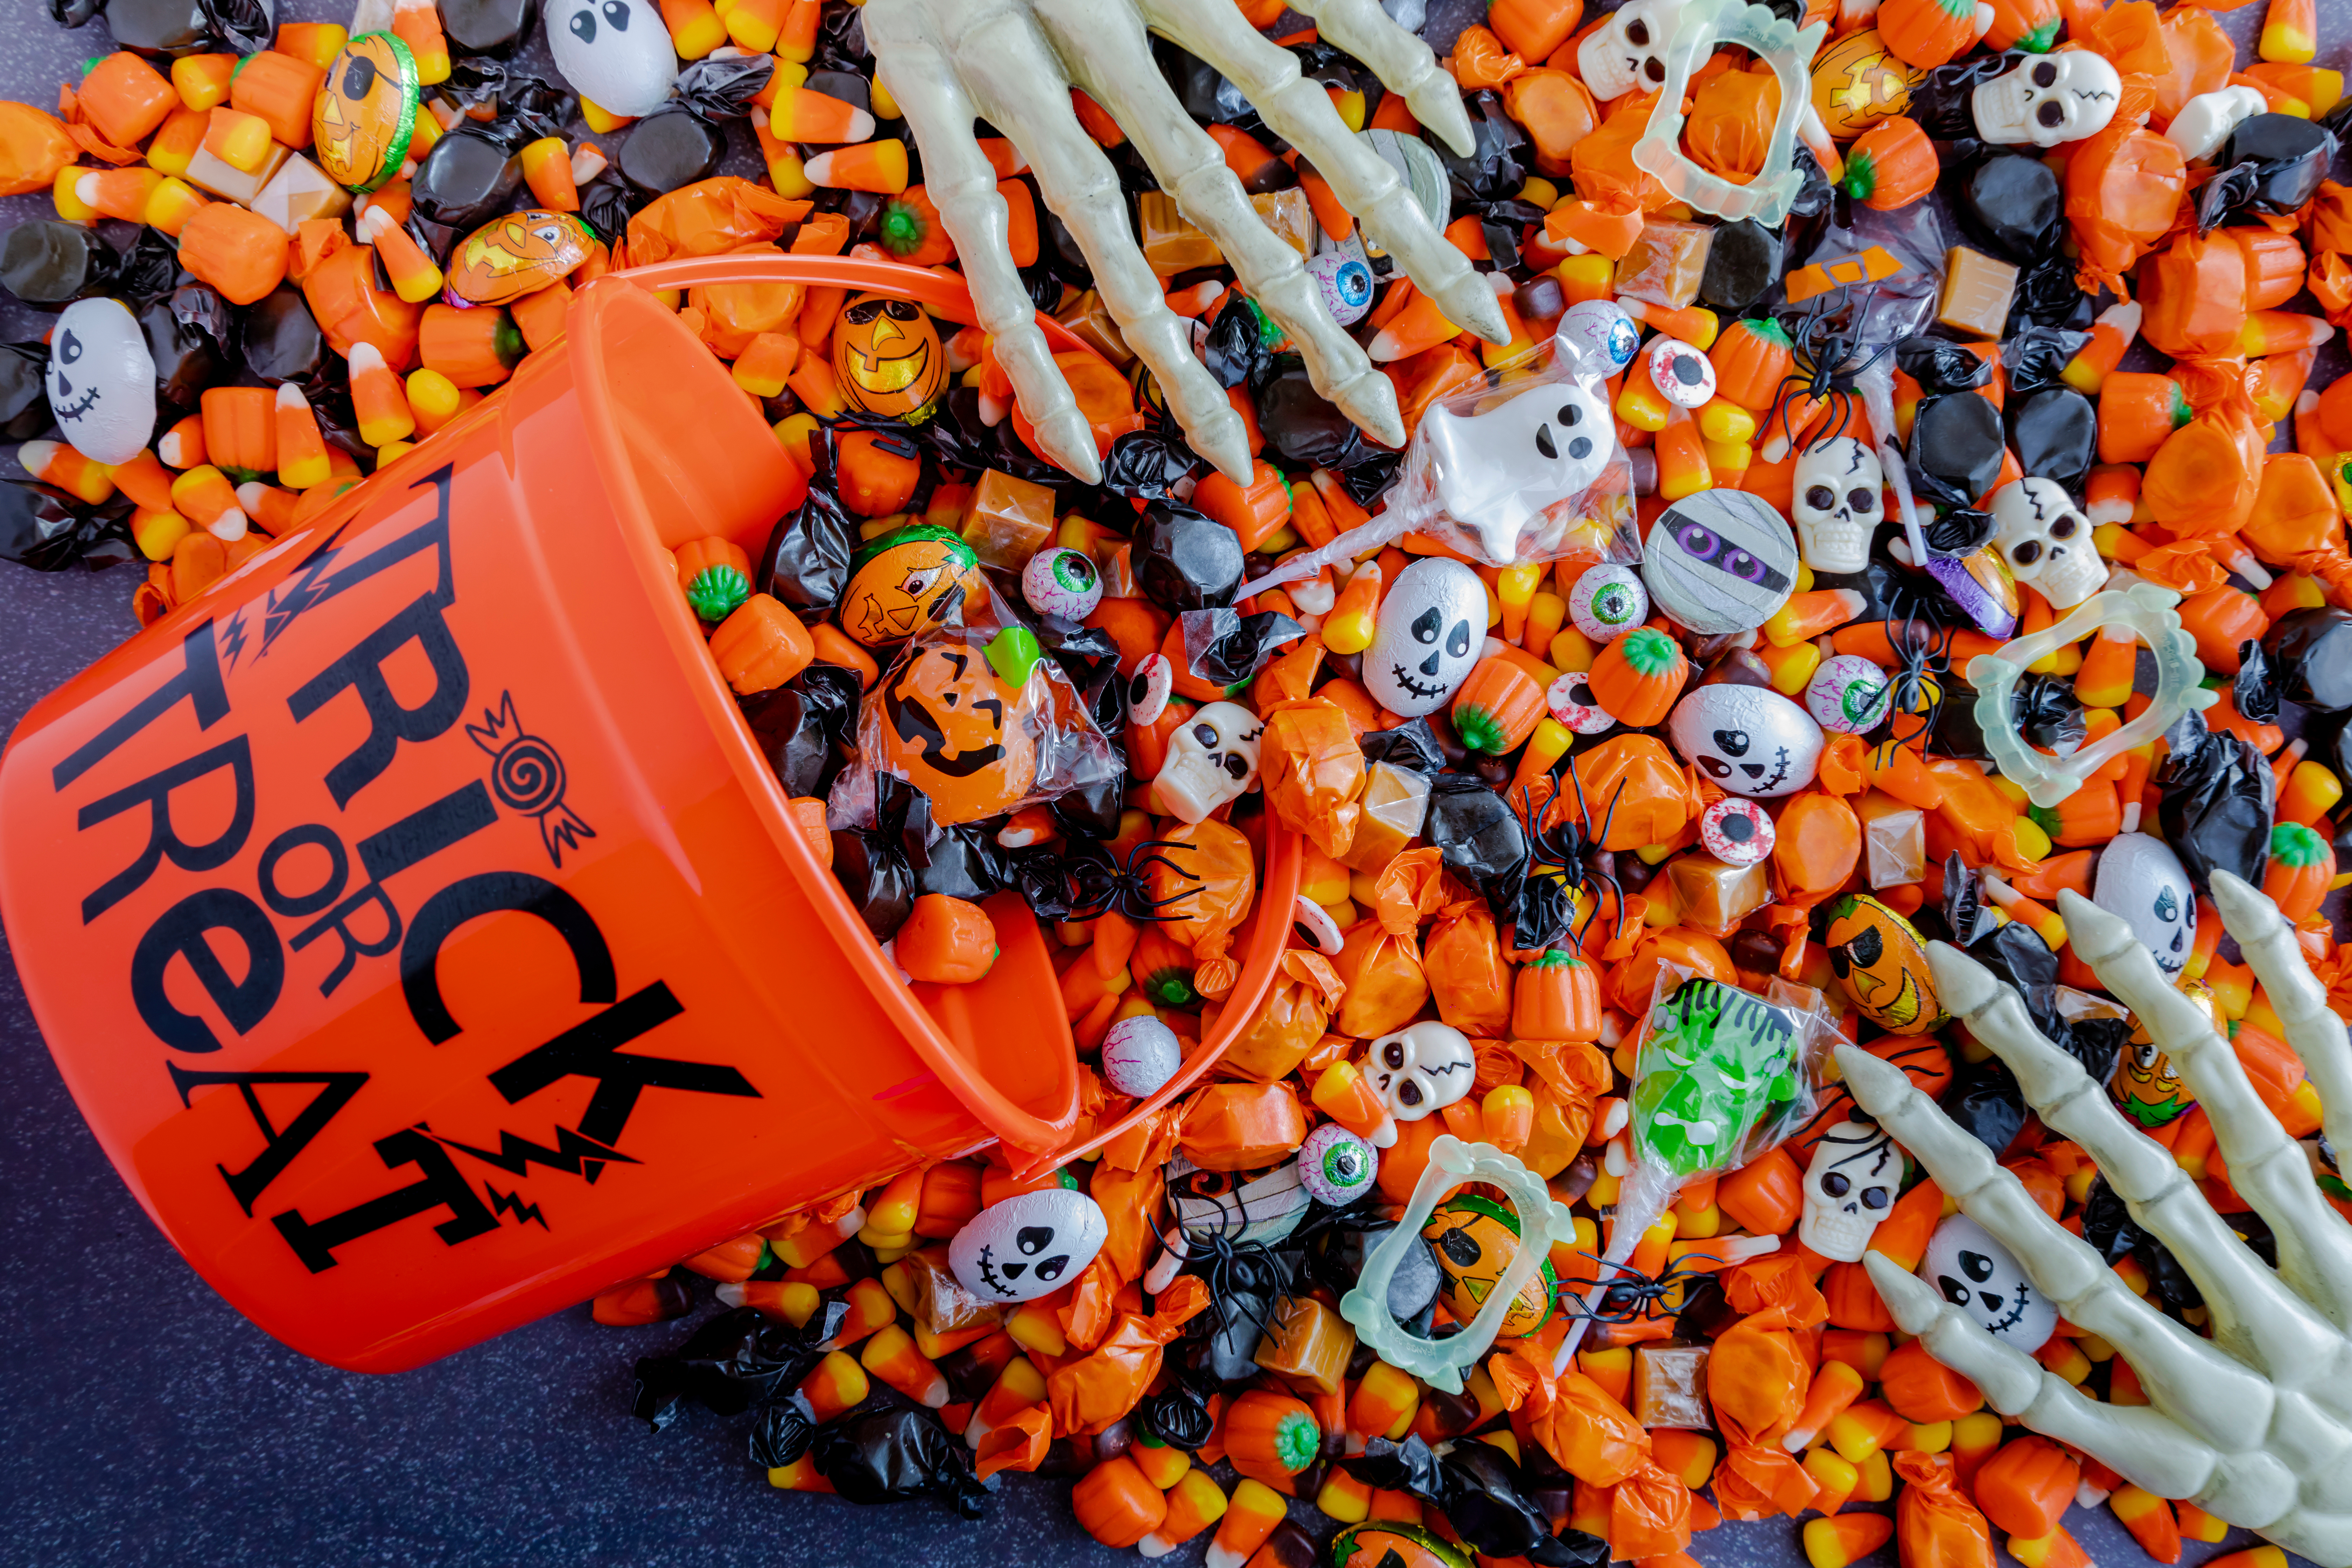 Orange trick or treat pail spilling Halloween candy on black stone surface with two skeleton hands reaching for the candy